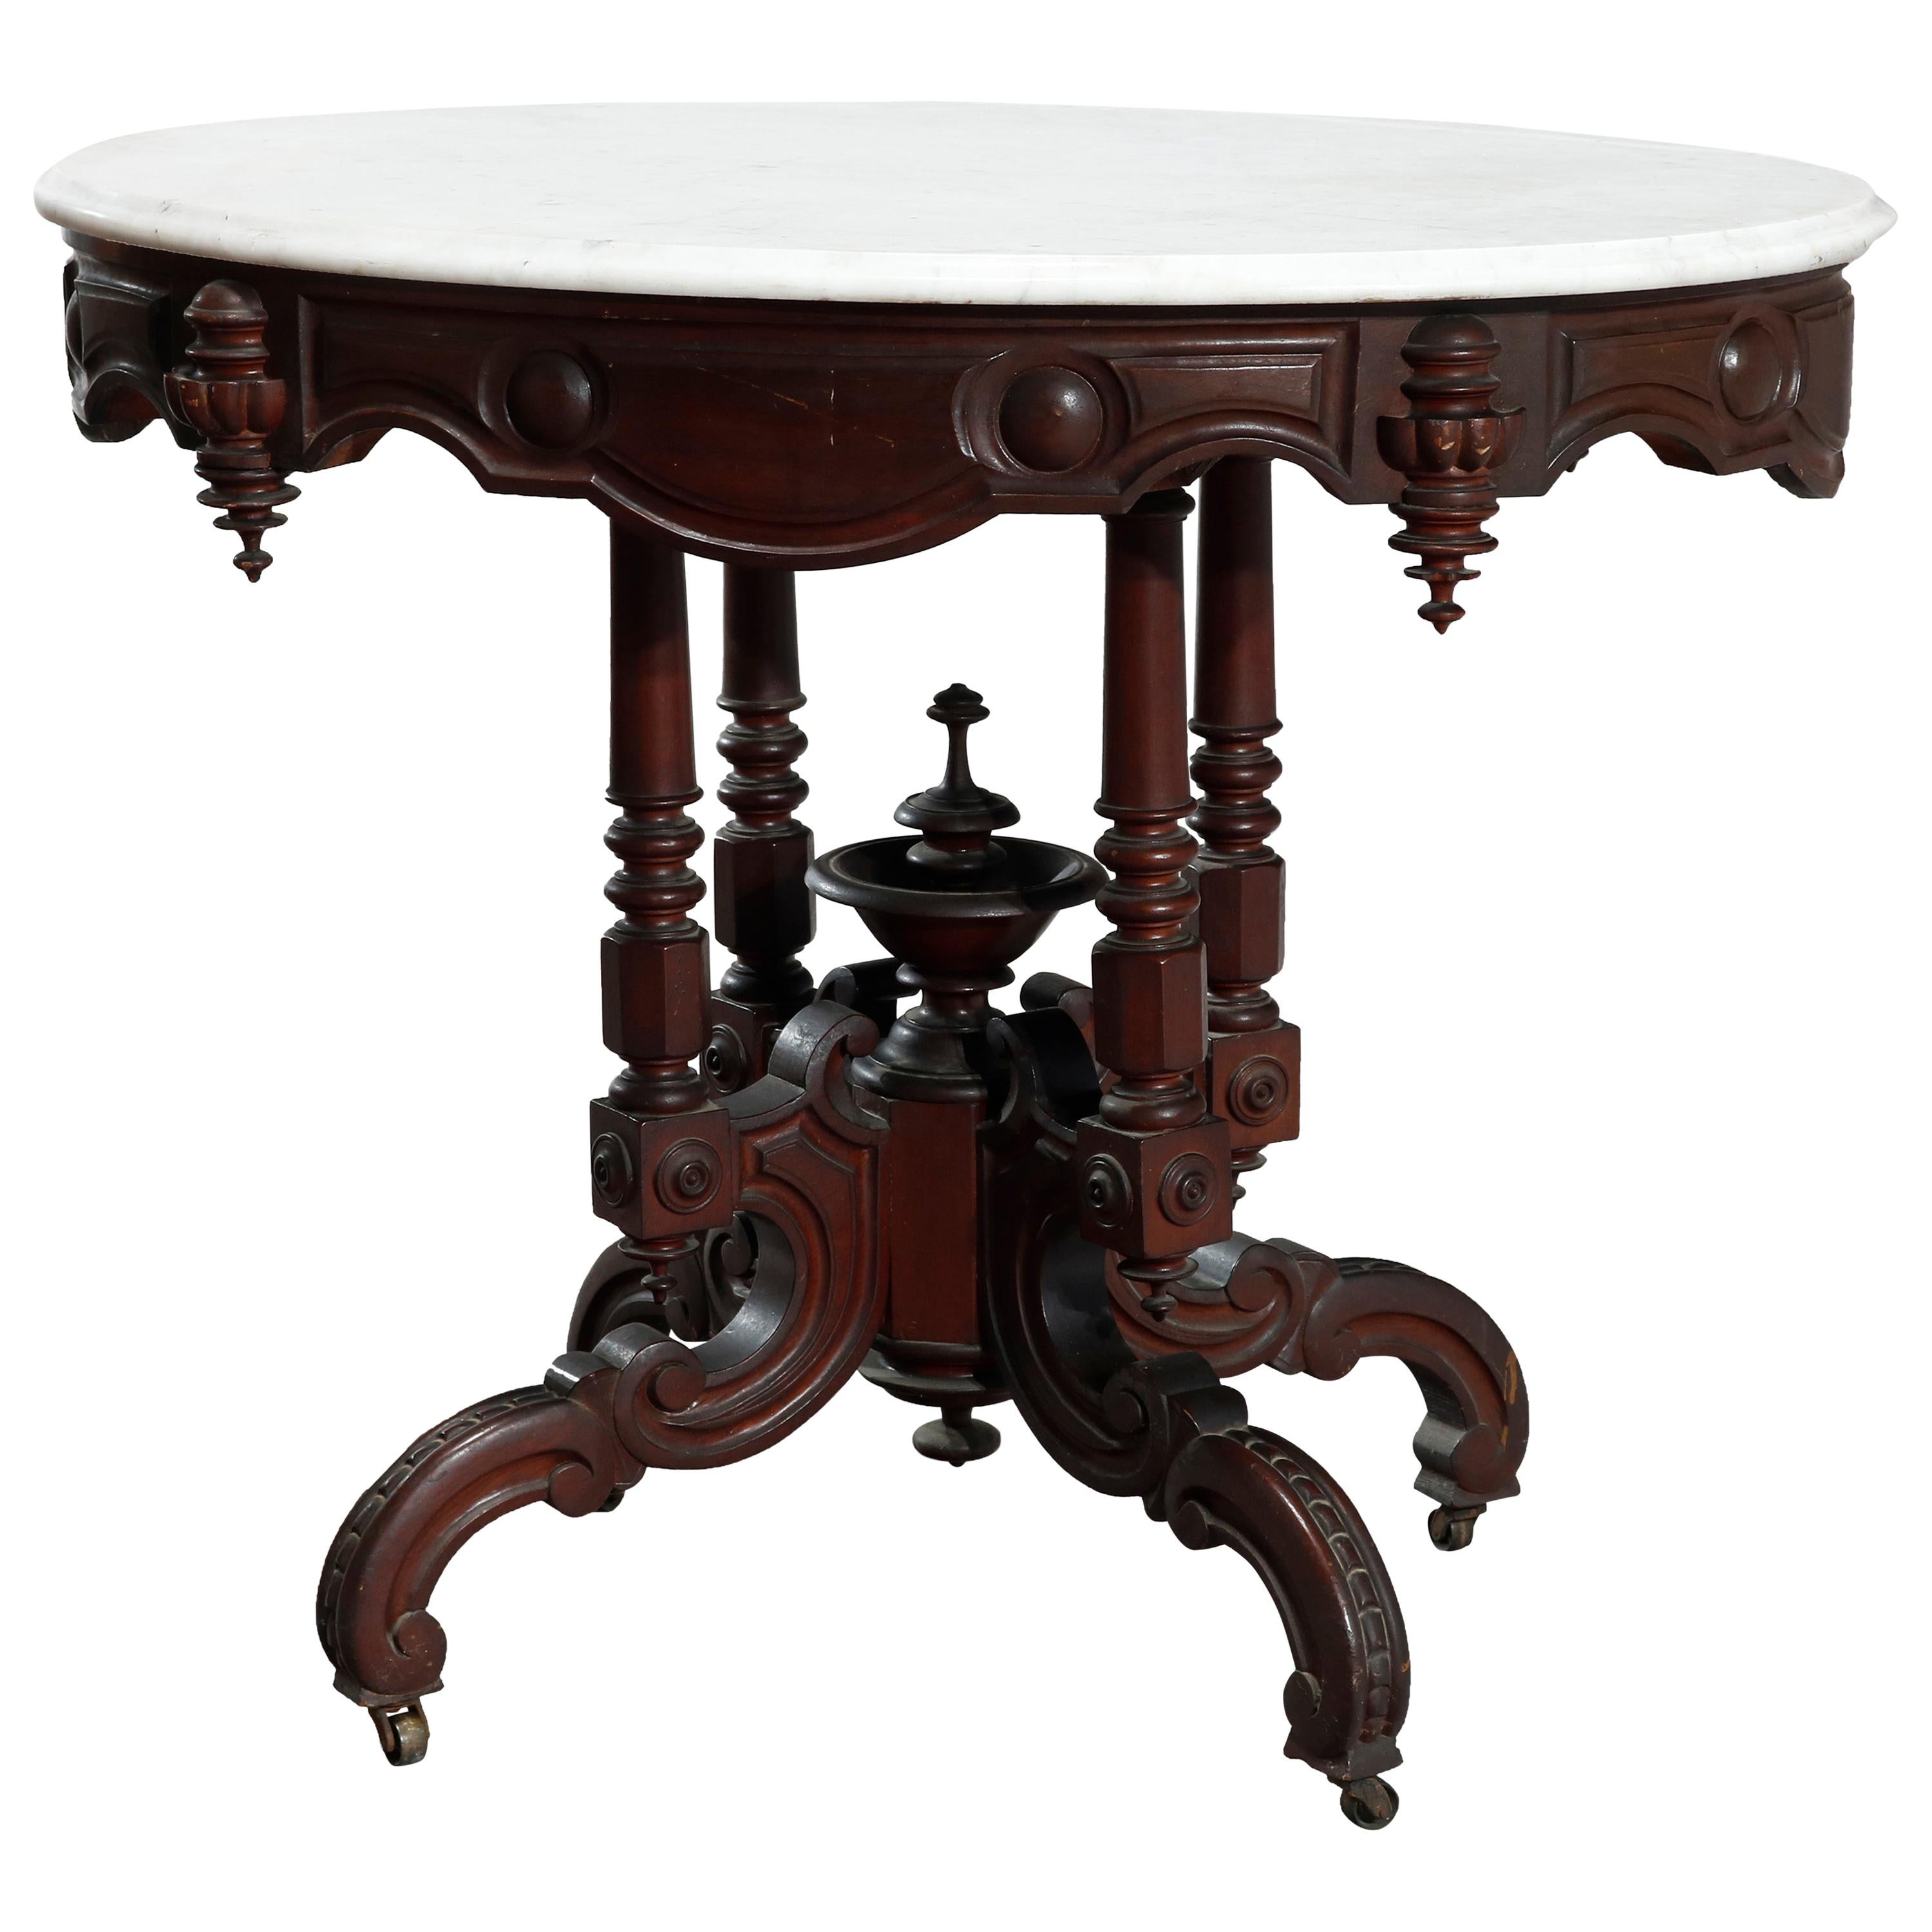 Antique Victorian Oval Carved Walnut Marble-Top Parlor Table, circa 1890